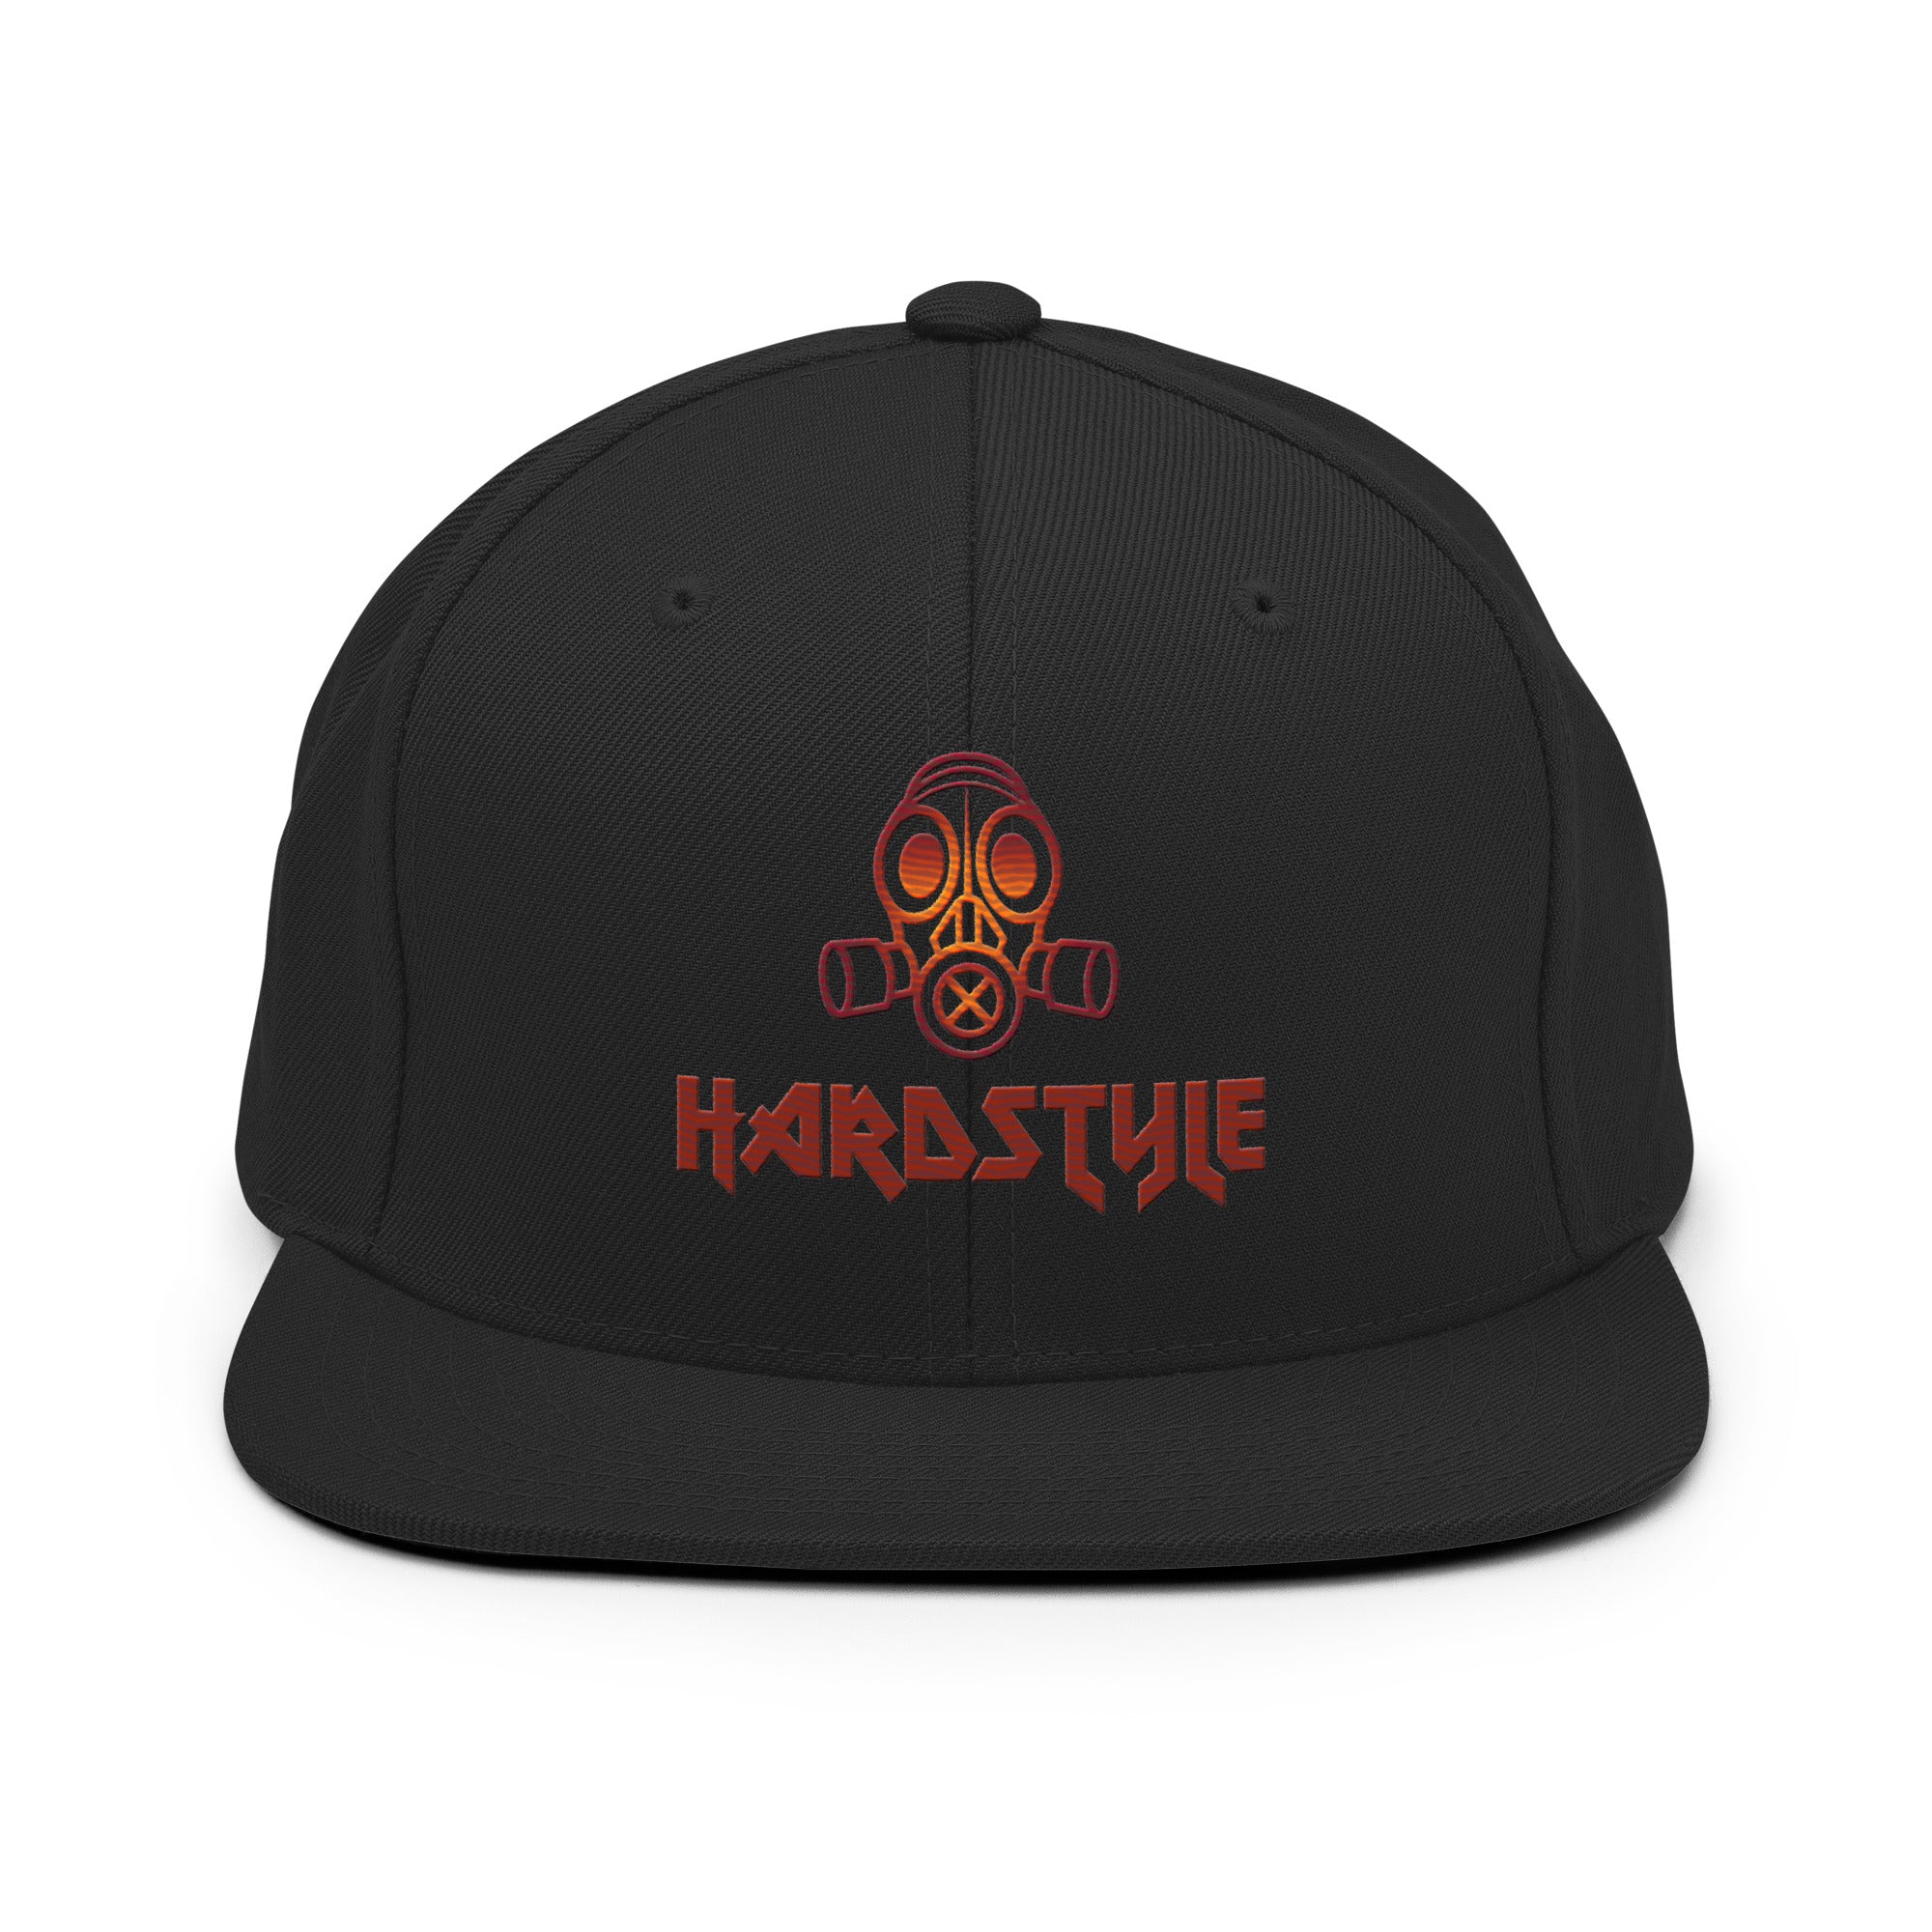 This HARDSTYLE SNAPBACK HAT is perfect for raves and music festivals. Wear it confidently while fist pumping and dancing the night away. Designed to stay on during high-energy activities, this snapback will keep you looking and feeling cool. Don't be afraid to go hard with this stylish hat by your side.